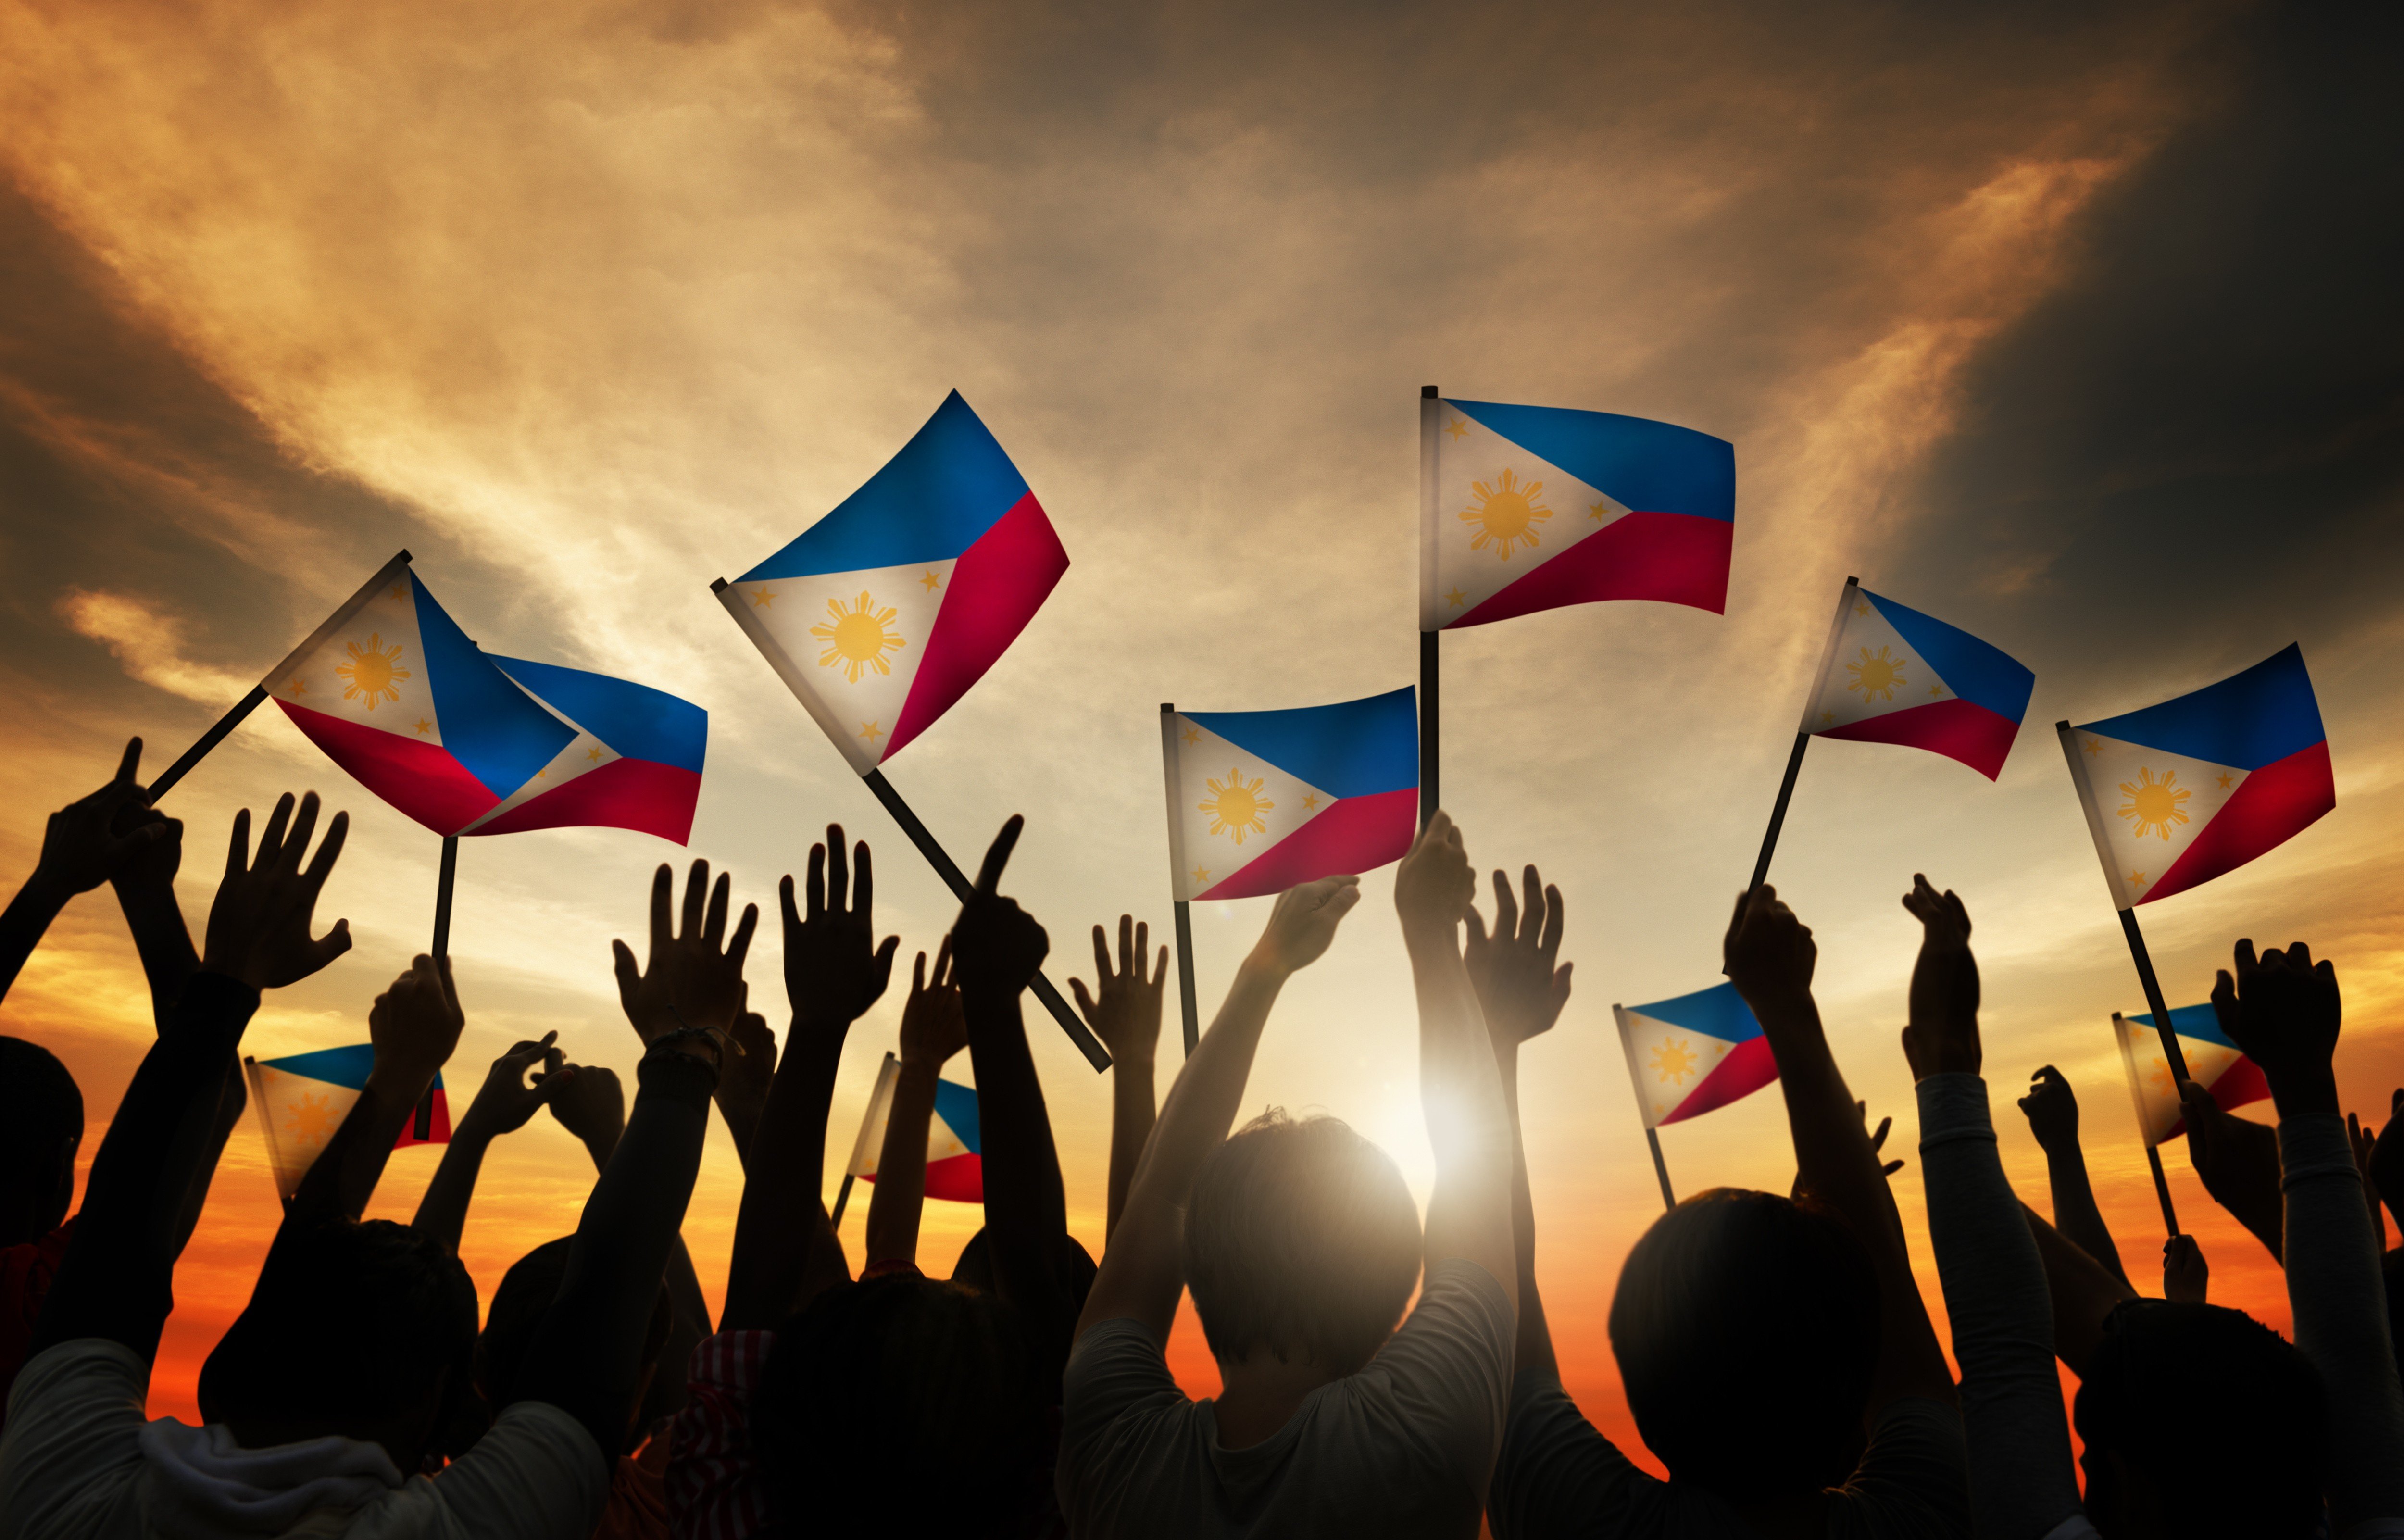 With growth rates to rival China, and a youthful population that values education and hard work, the Philippines holds great potential, argues a recent report